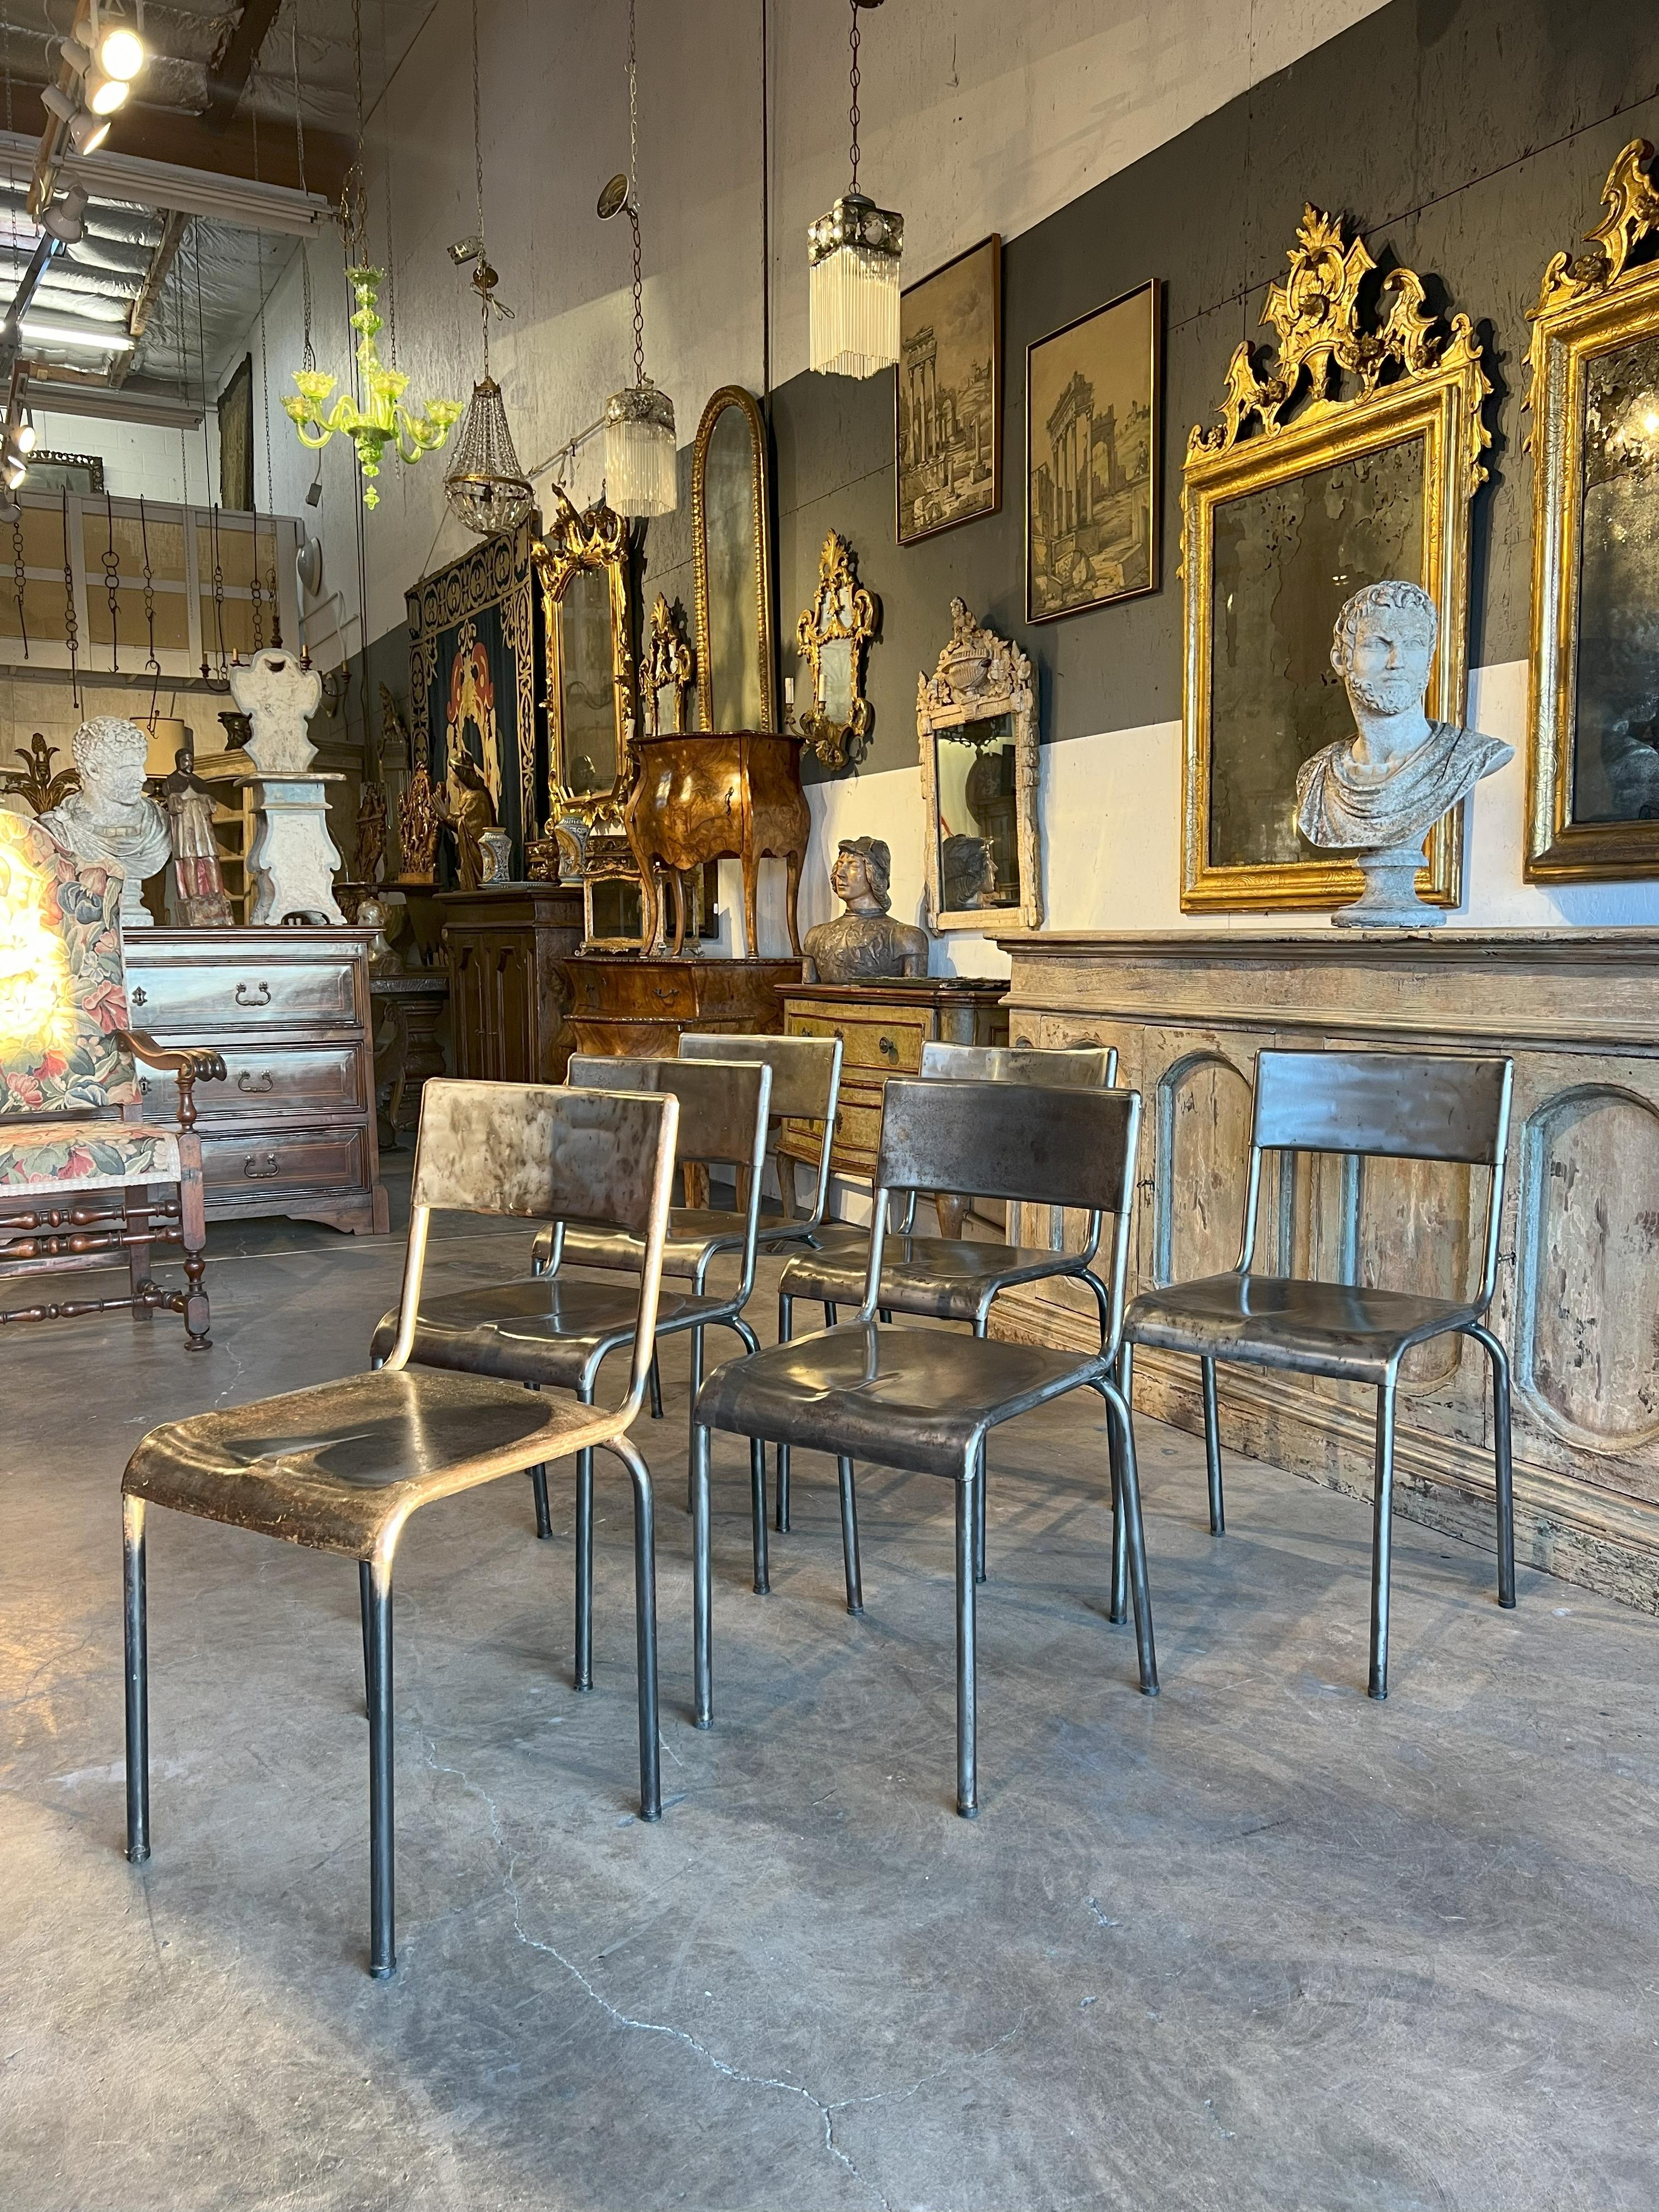 These set of six chairs have been imported directly from Parma, the center of Italy, and have been crafted in the classic Industrial style, circa 1930. 
Probably originally from a school or a theater.
These chairs have an industrial modern look that